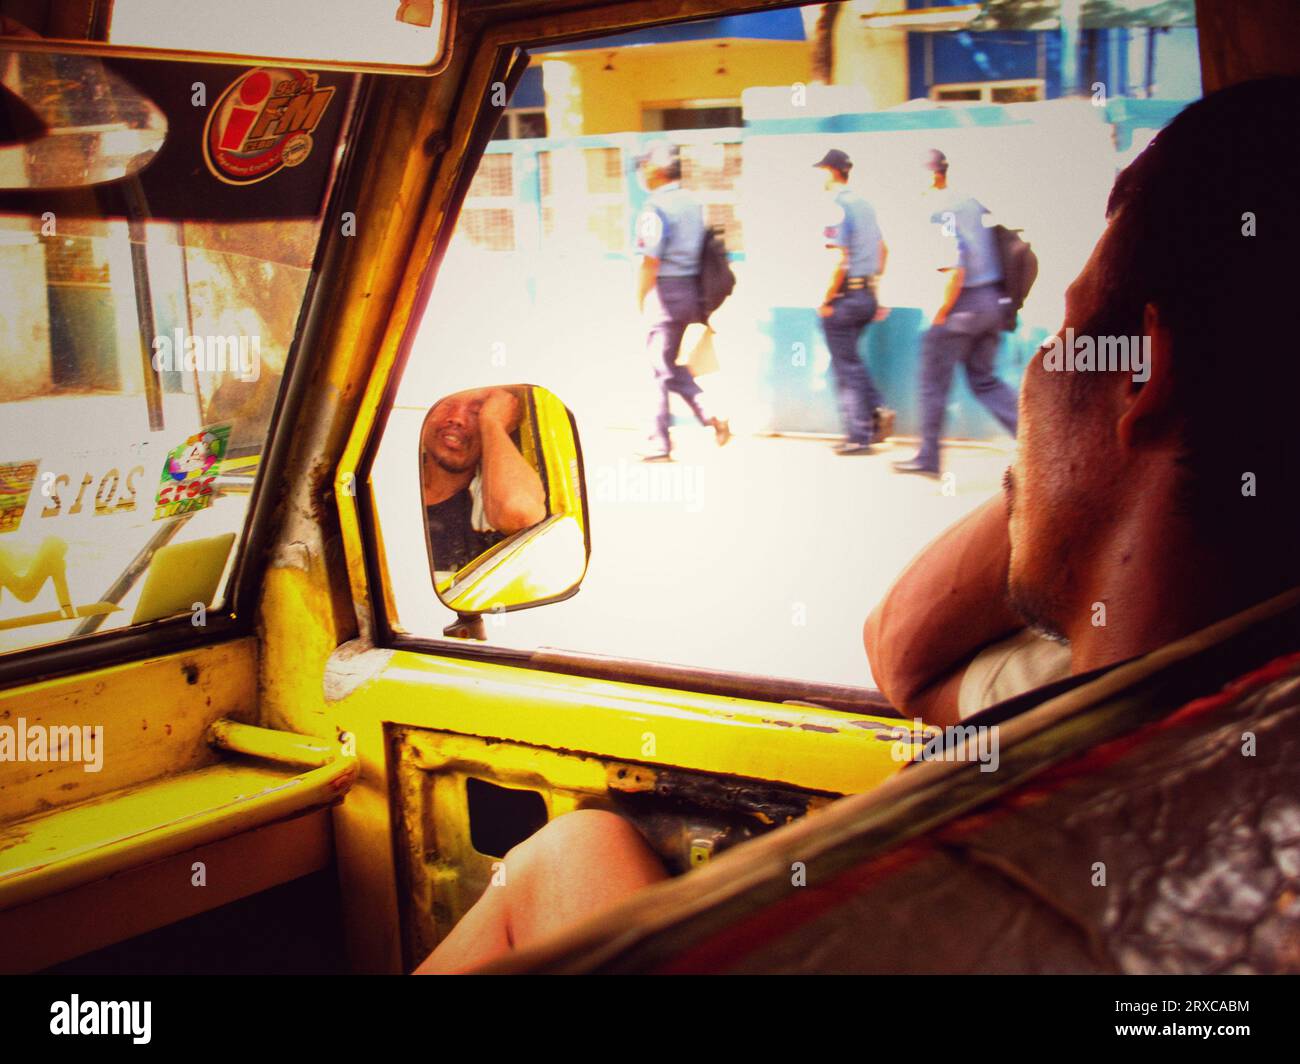 Cebu city, Philippines - October 03, 2013: Exhausted passenger man sleeping on a front seat of jeepney vehicle during traffic hour in Cebu city. Stock Photo